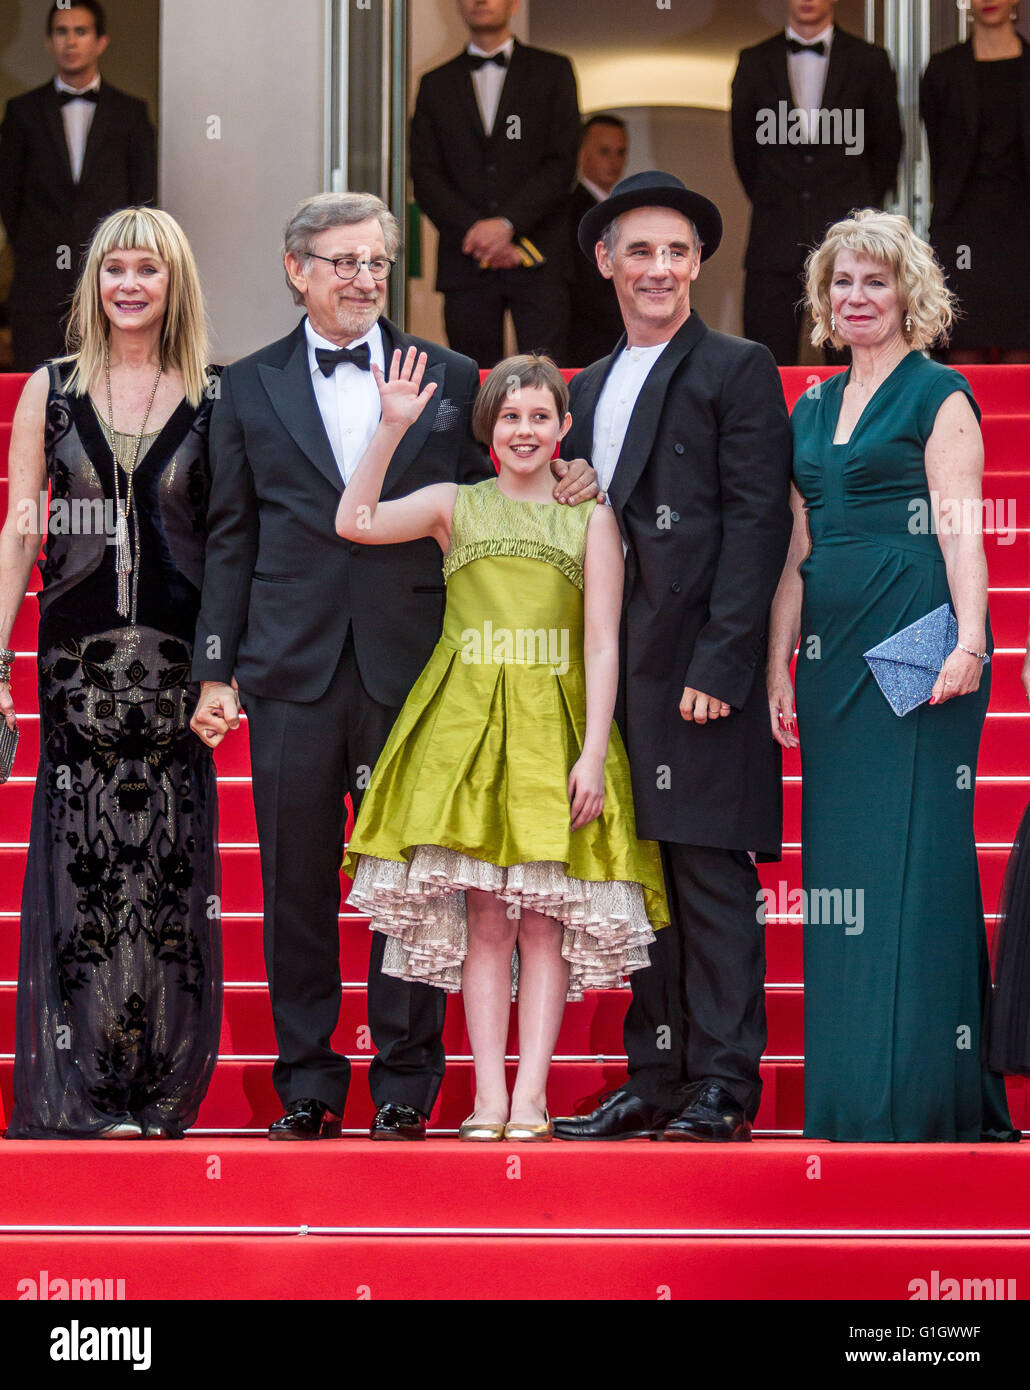 STEVEN SPIELBERG, KATE CAPSHAW, RUBY BARNHILL, MARK RYLANCE  ACTORS AND DIRECTOR  THE BFG. PREMIERE 69TH CANNES FILM FESTIVAL  CANNES, , FRANCE  15 May 2016  DIW89325 Stock Photo